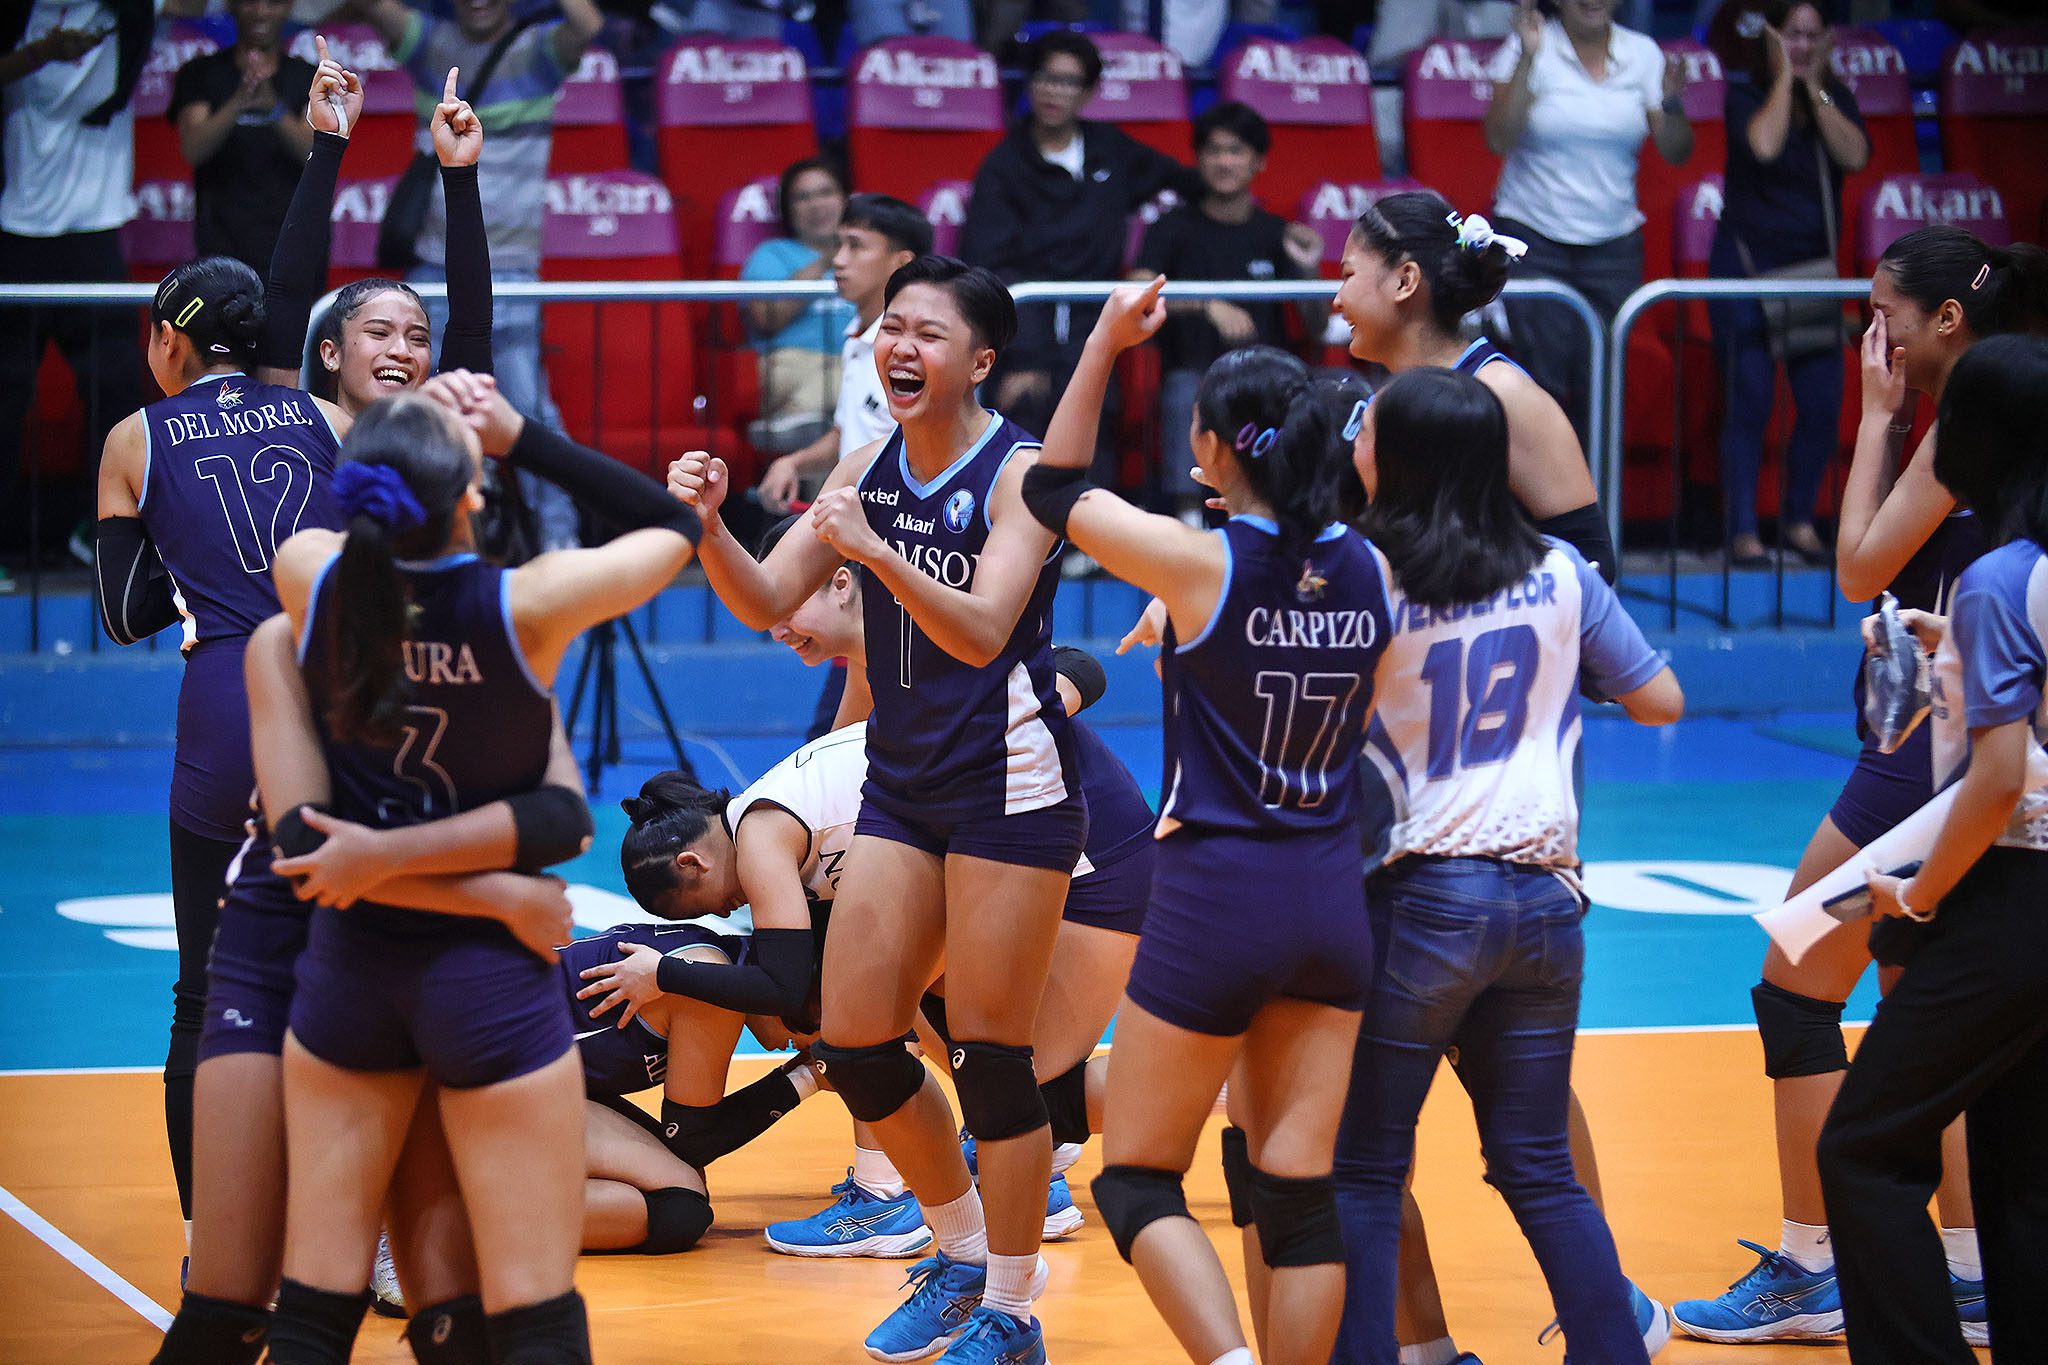 More UAAP HS history: Adamson claims first girls’ volley title, NU rules boys’ tourney